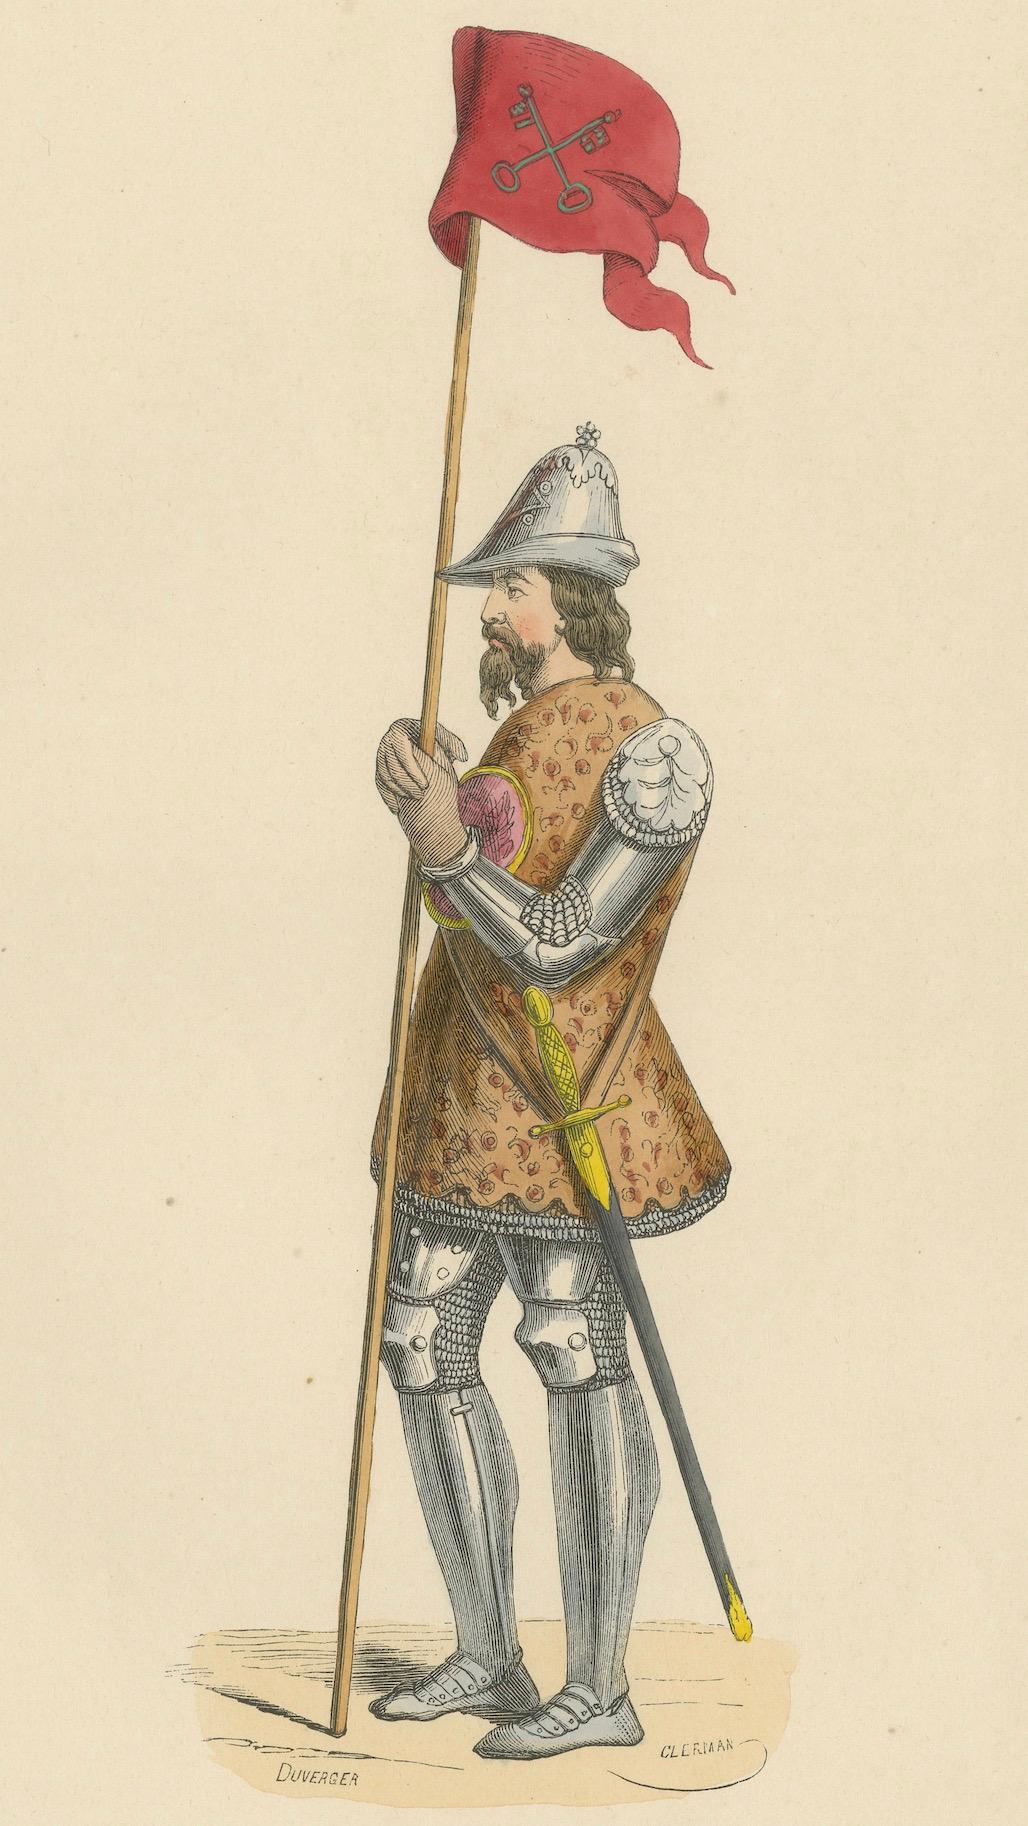 This is an illustration of a soldier from Venice, known as a 